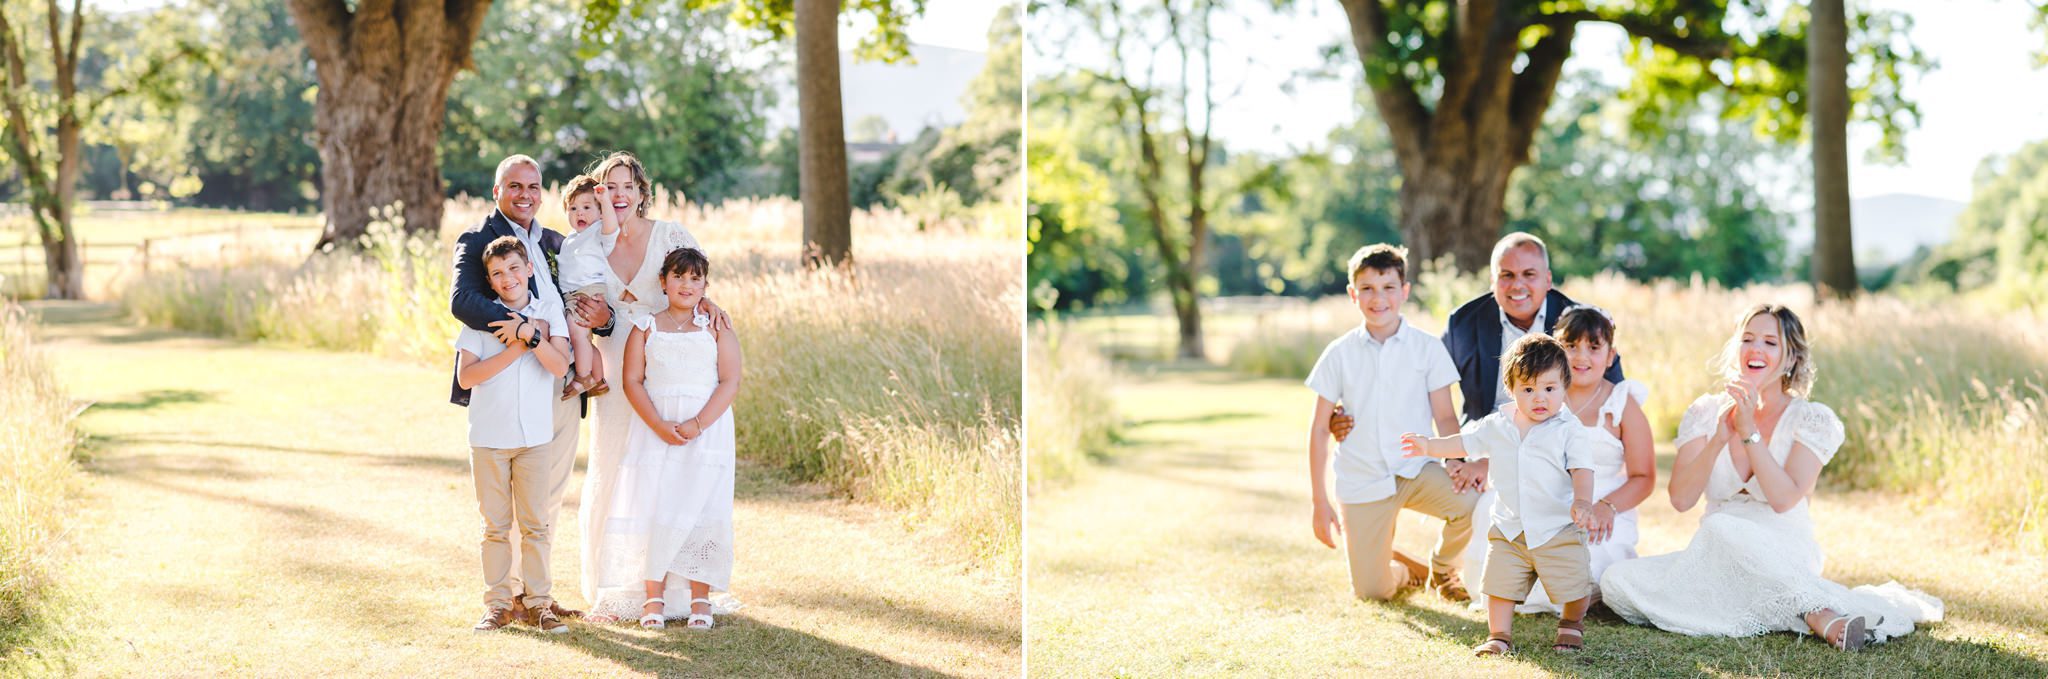 Family portraits in the evening sunshine at Barns and Yard